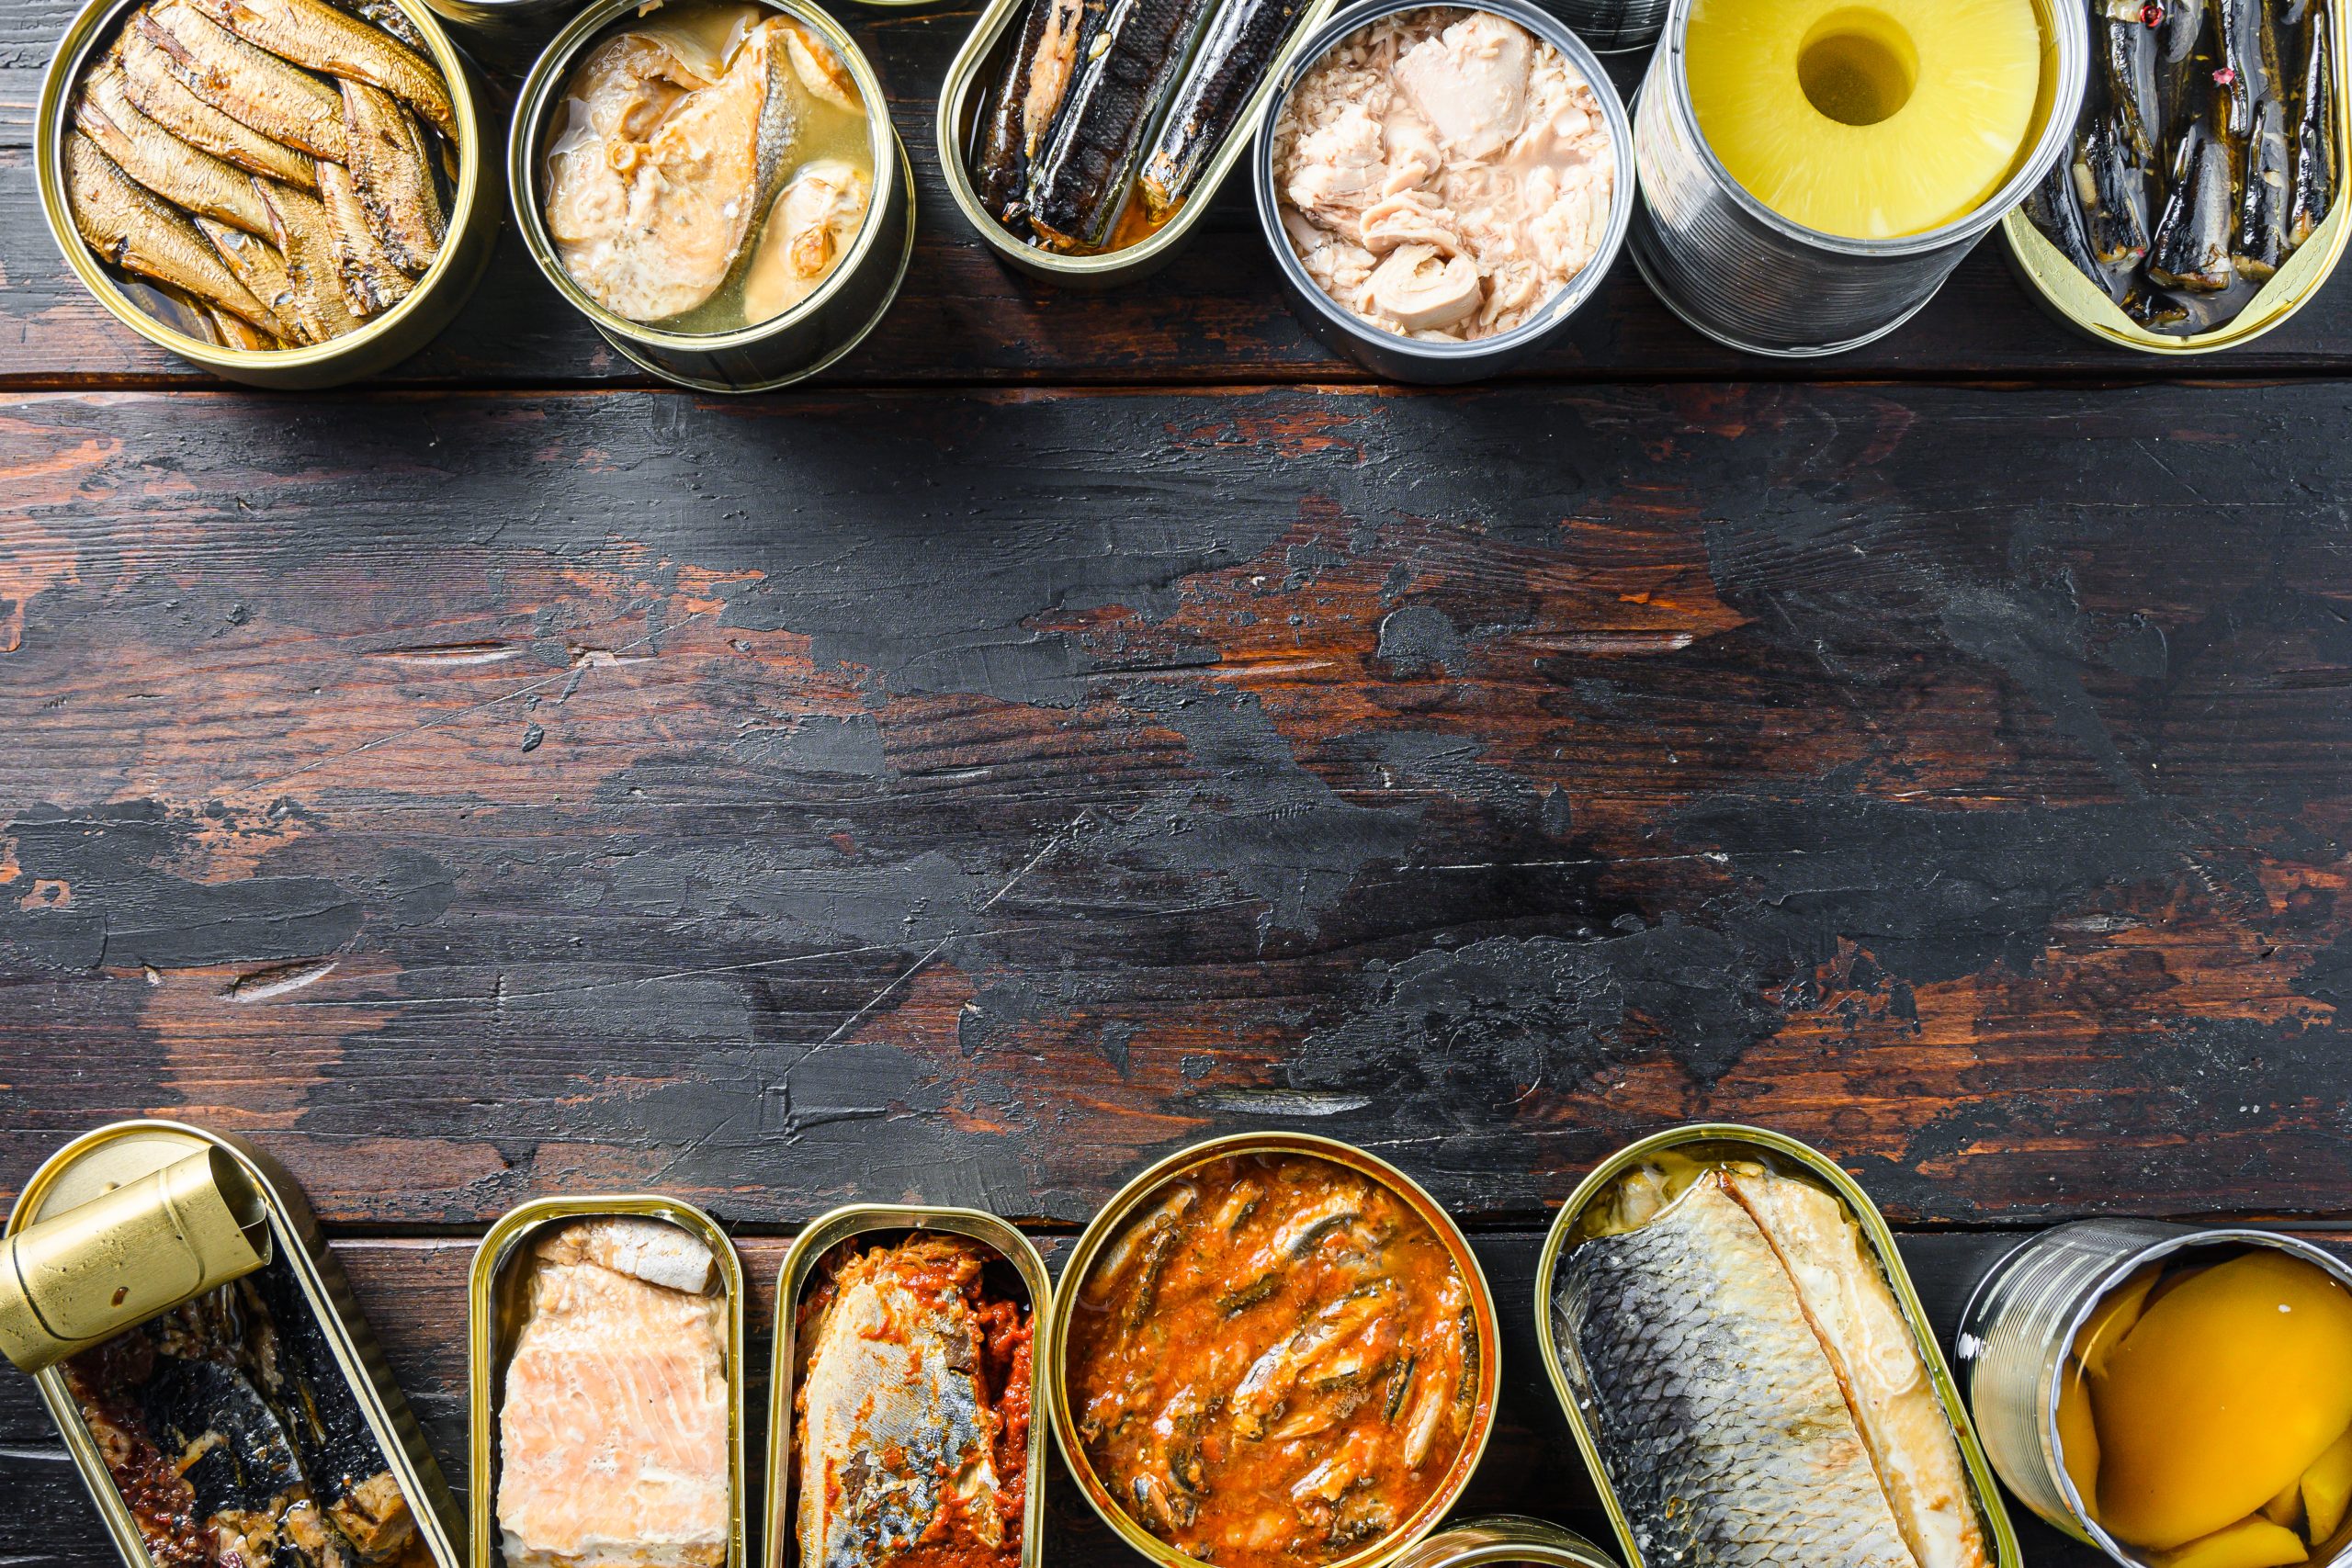 What is the most common canned fish